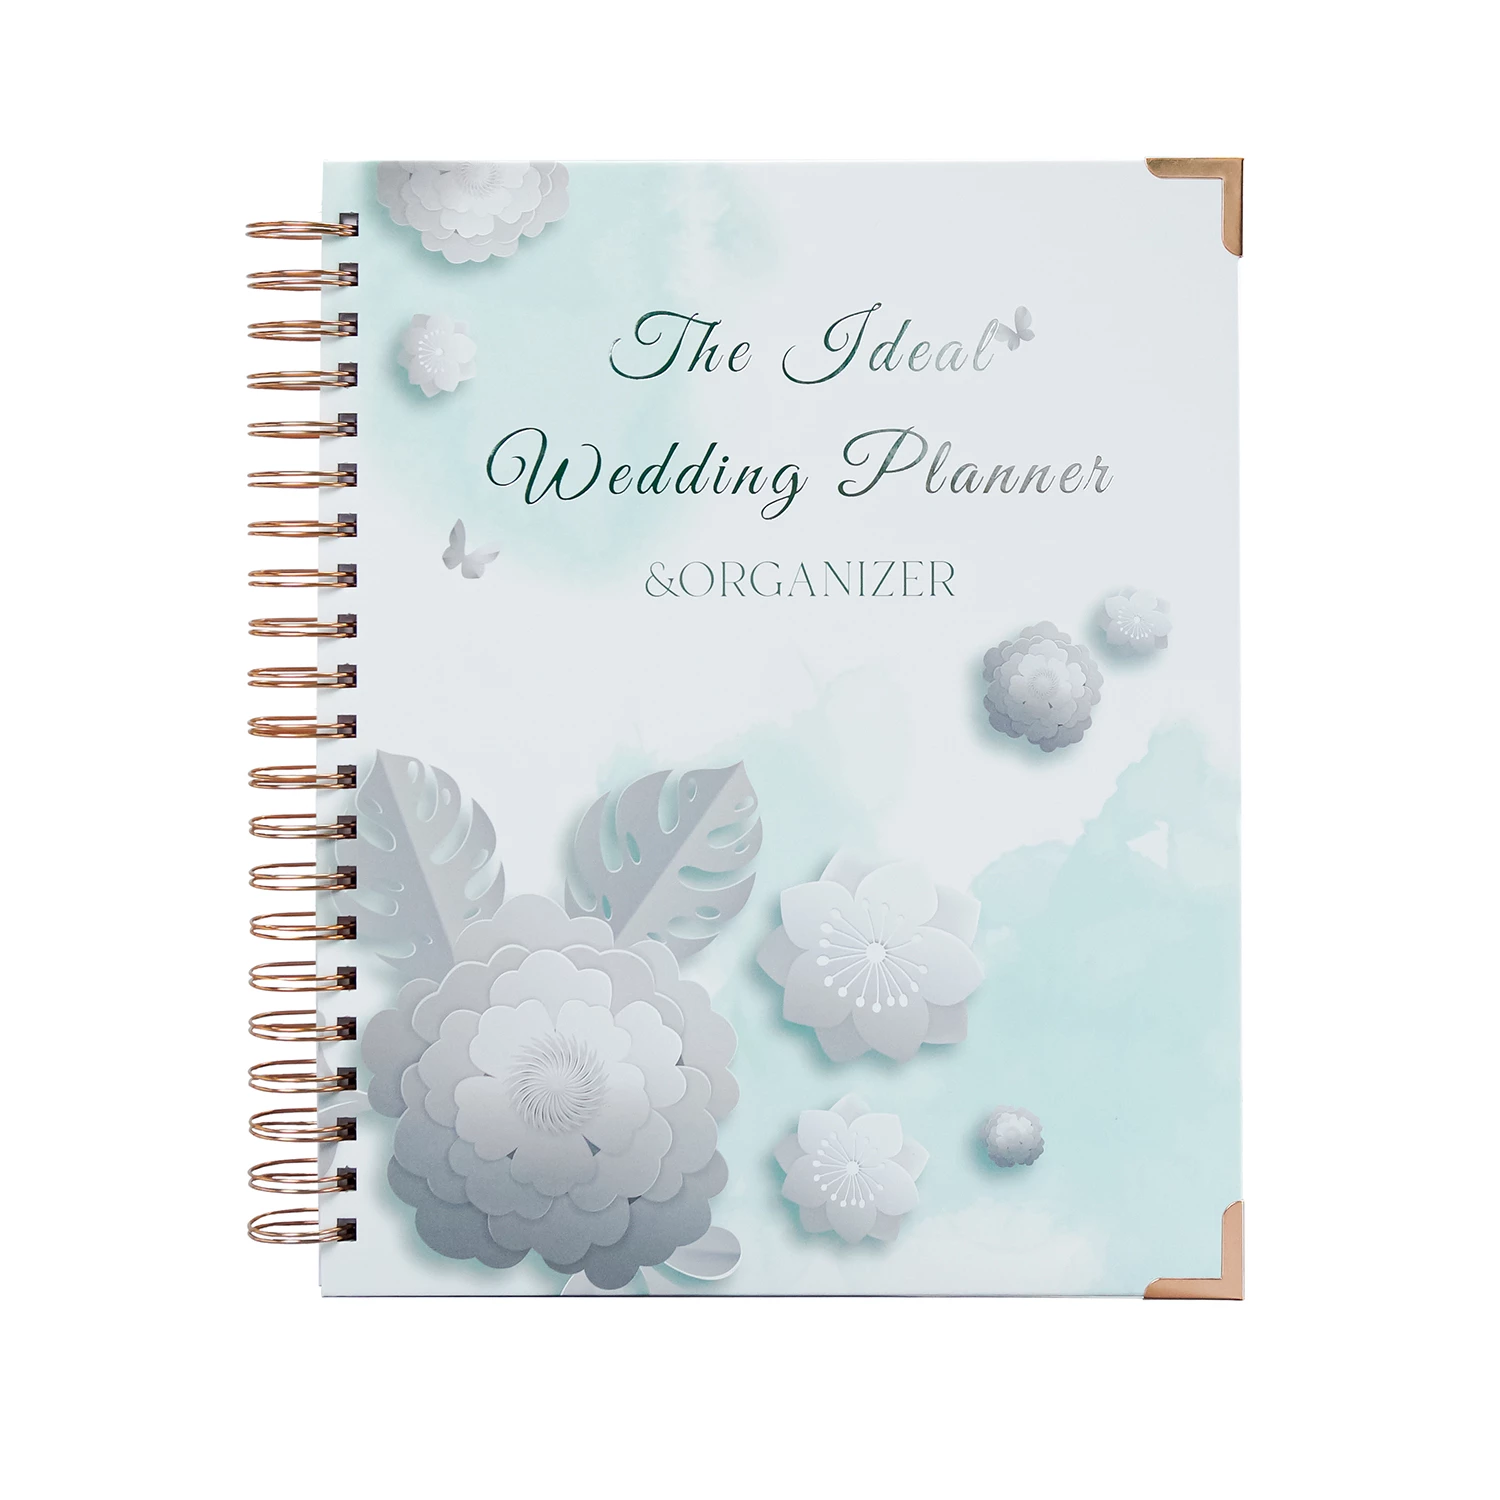 Wedding Planner Make Your Wedding  Planning Easy and Organized  green